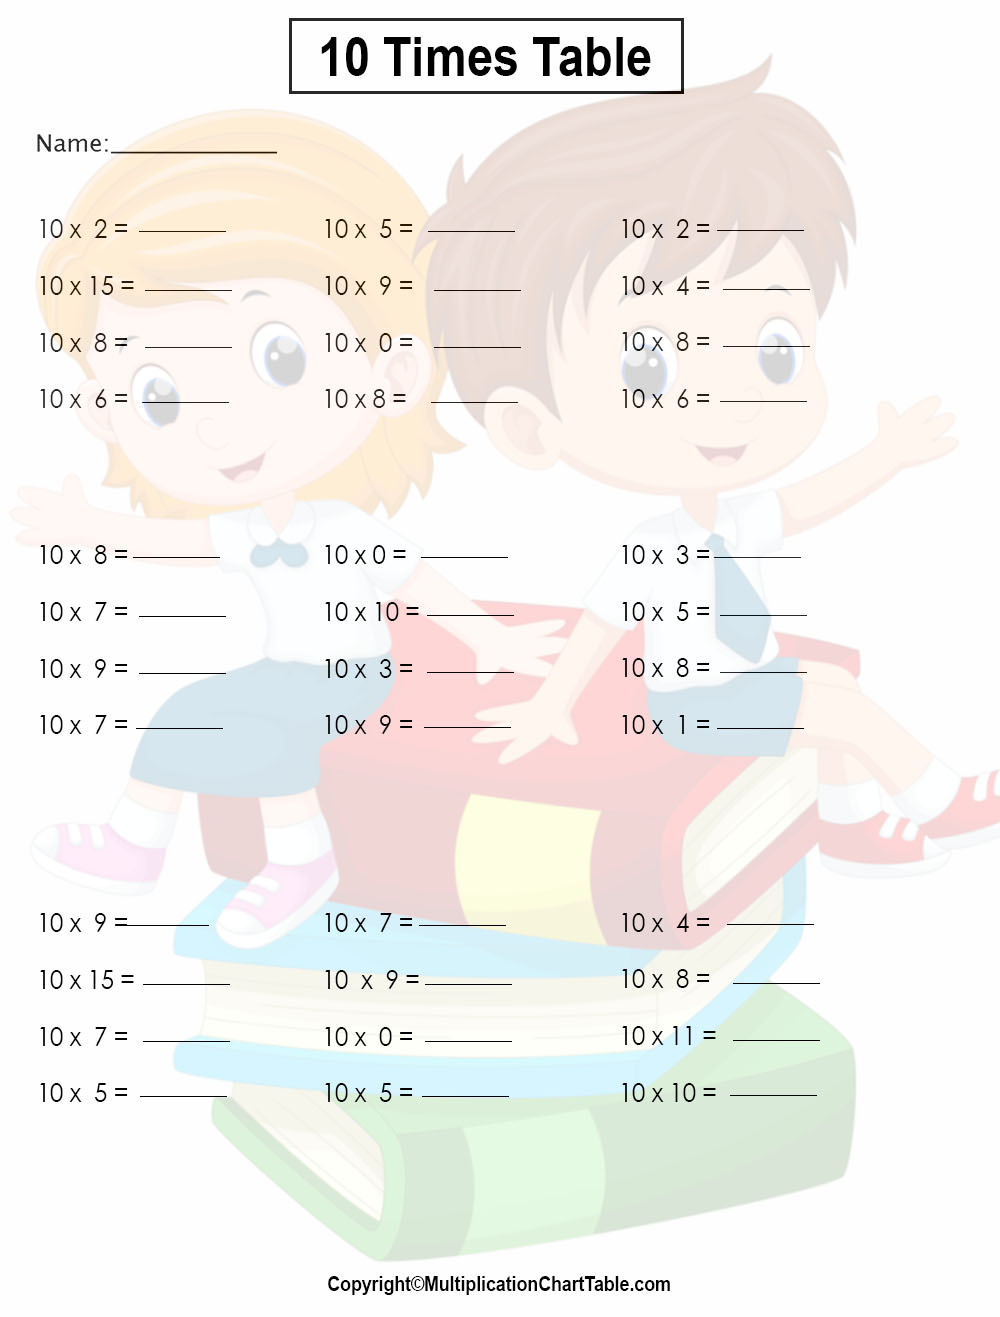 10 times table worksheets